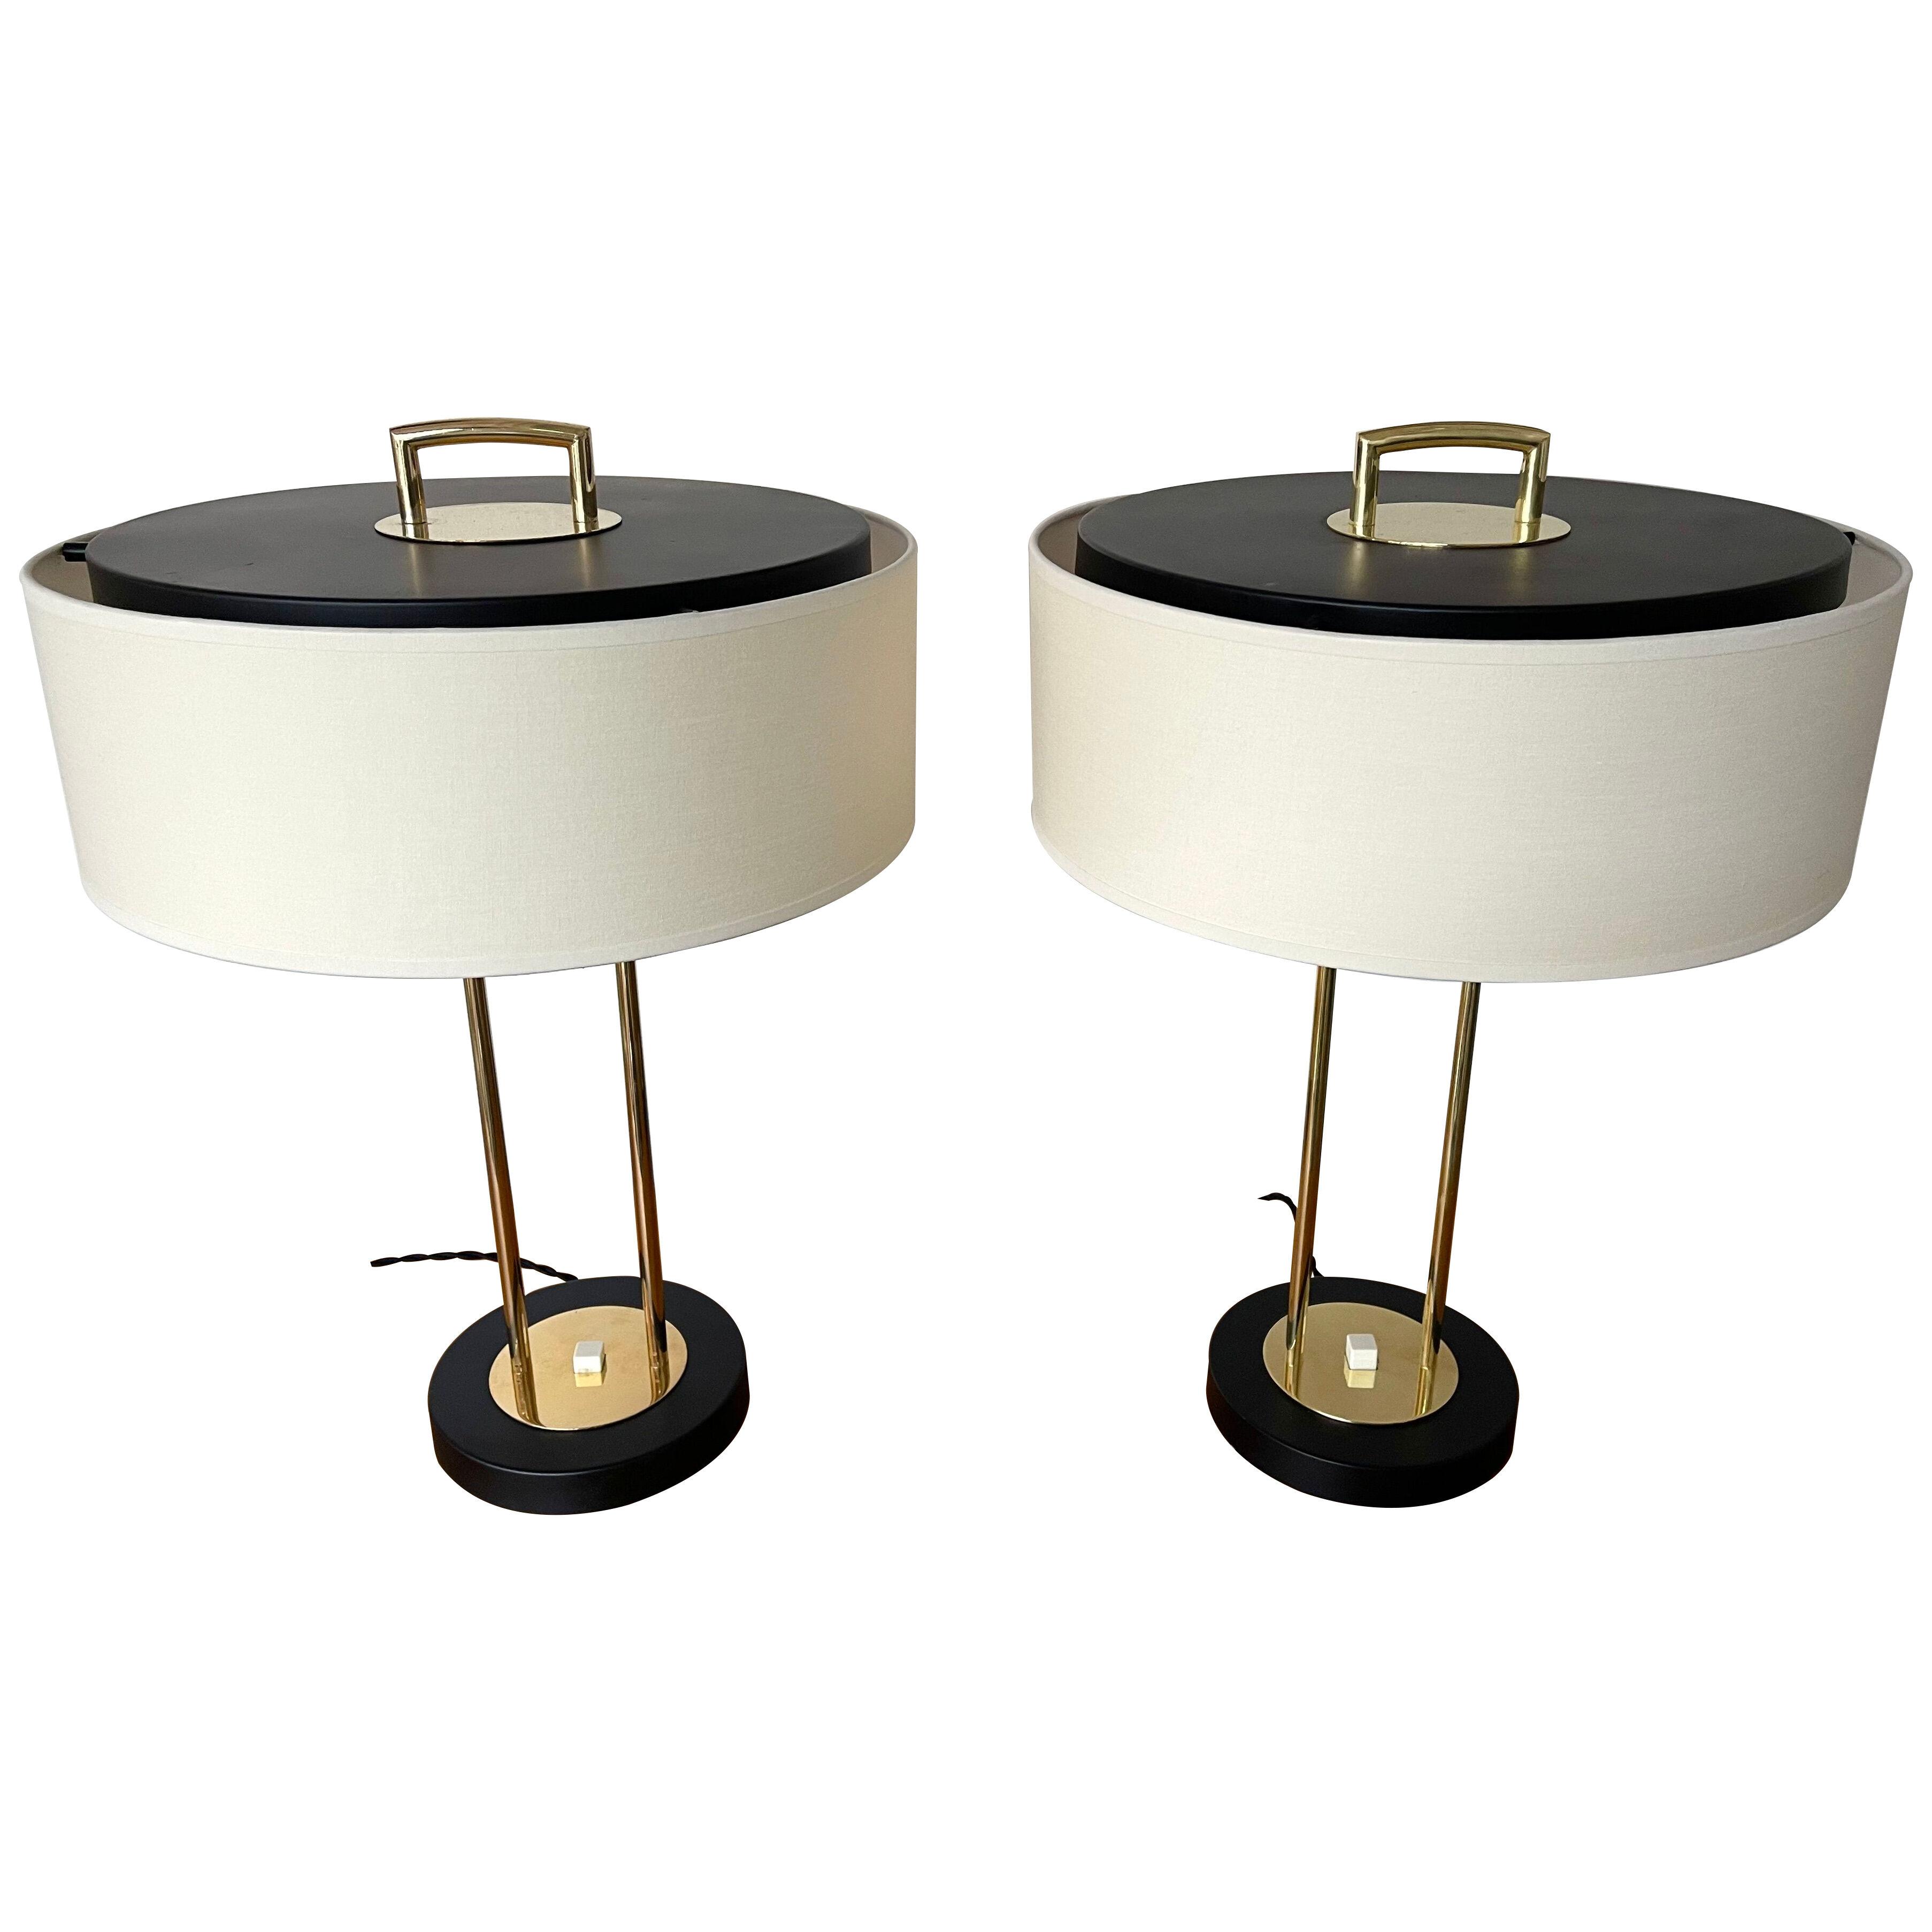 Pair of Brass and Black Painted Metal Lamps President by Arlus. France, 1950s